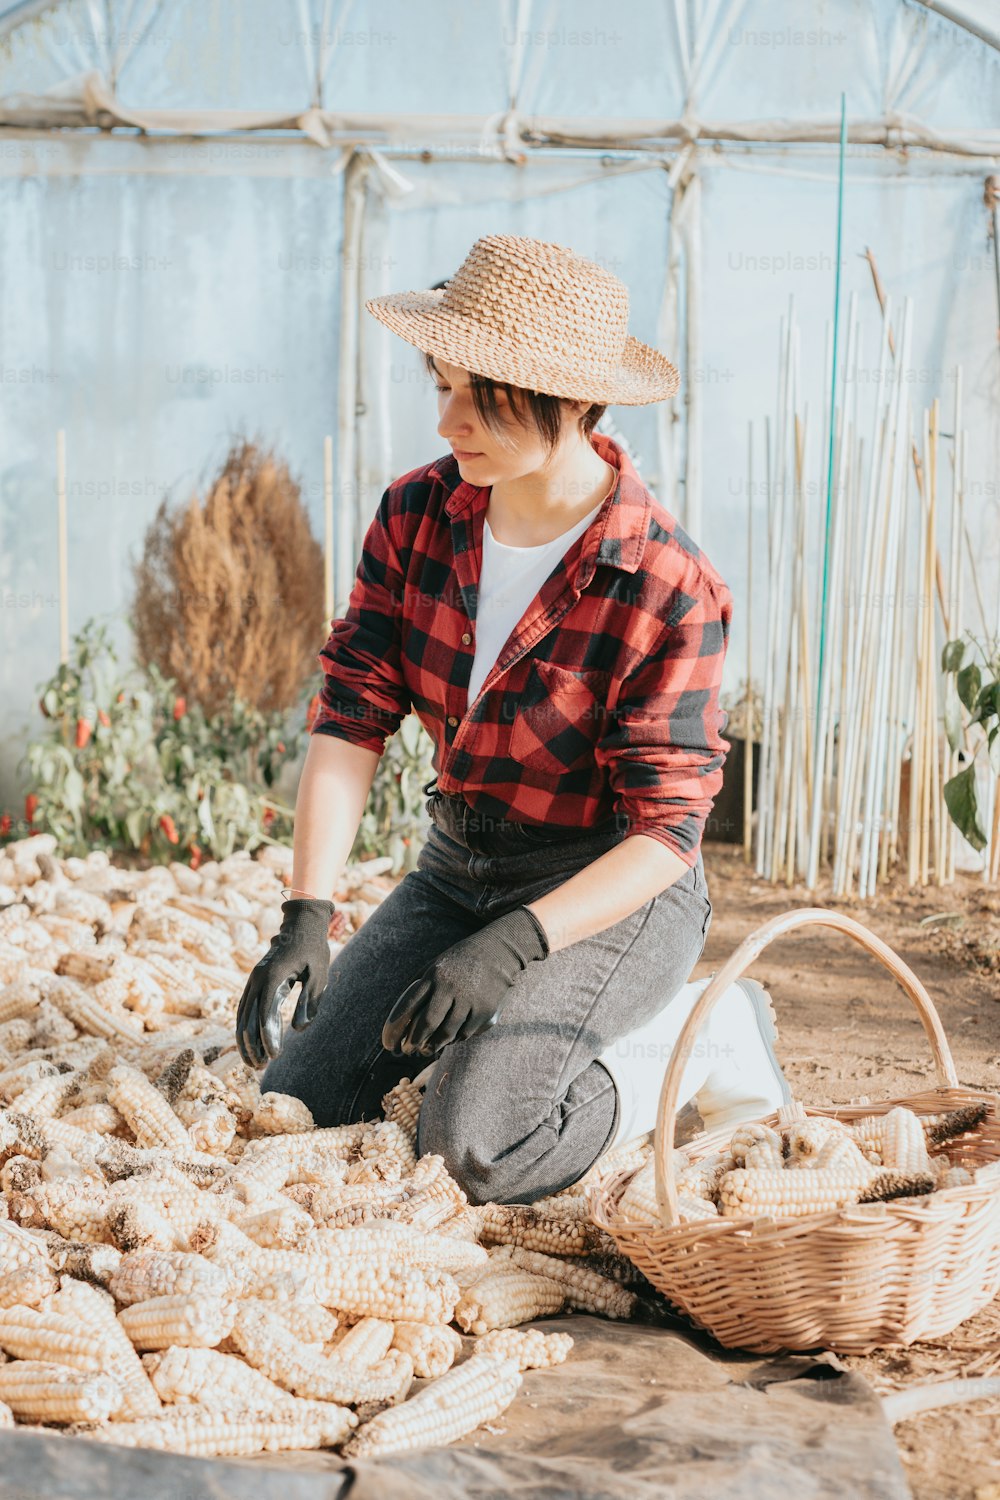 a woman in a straw hat is working in a greenhouse